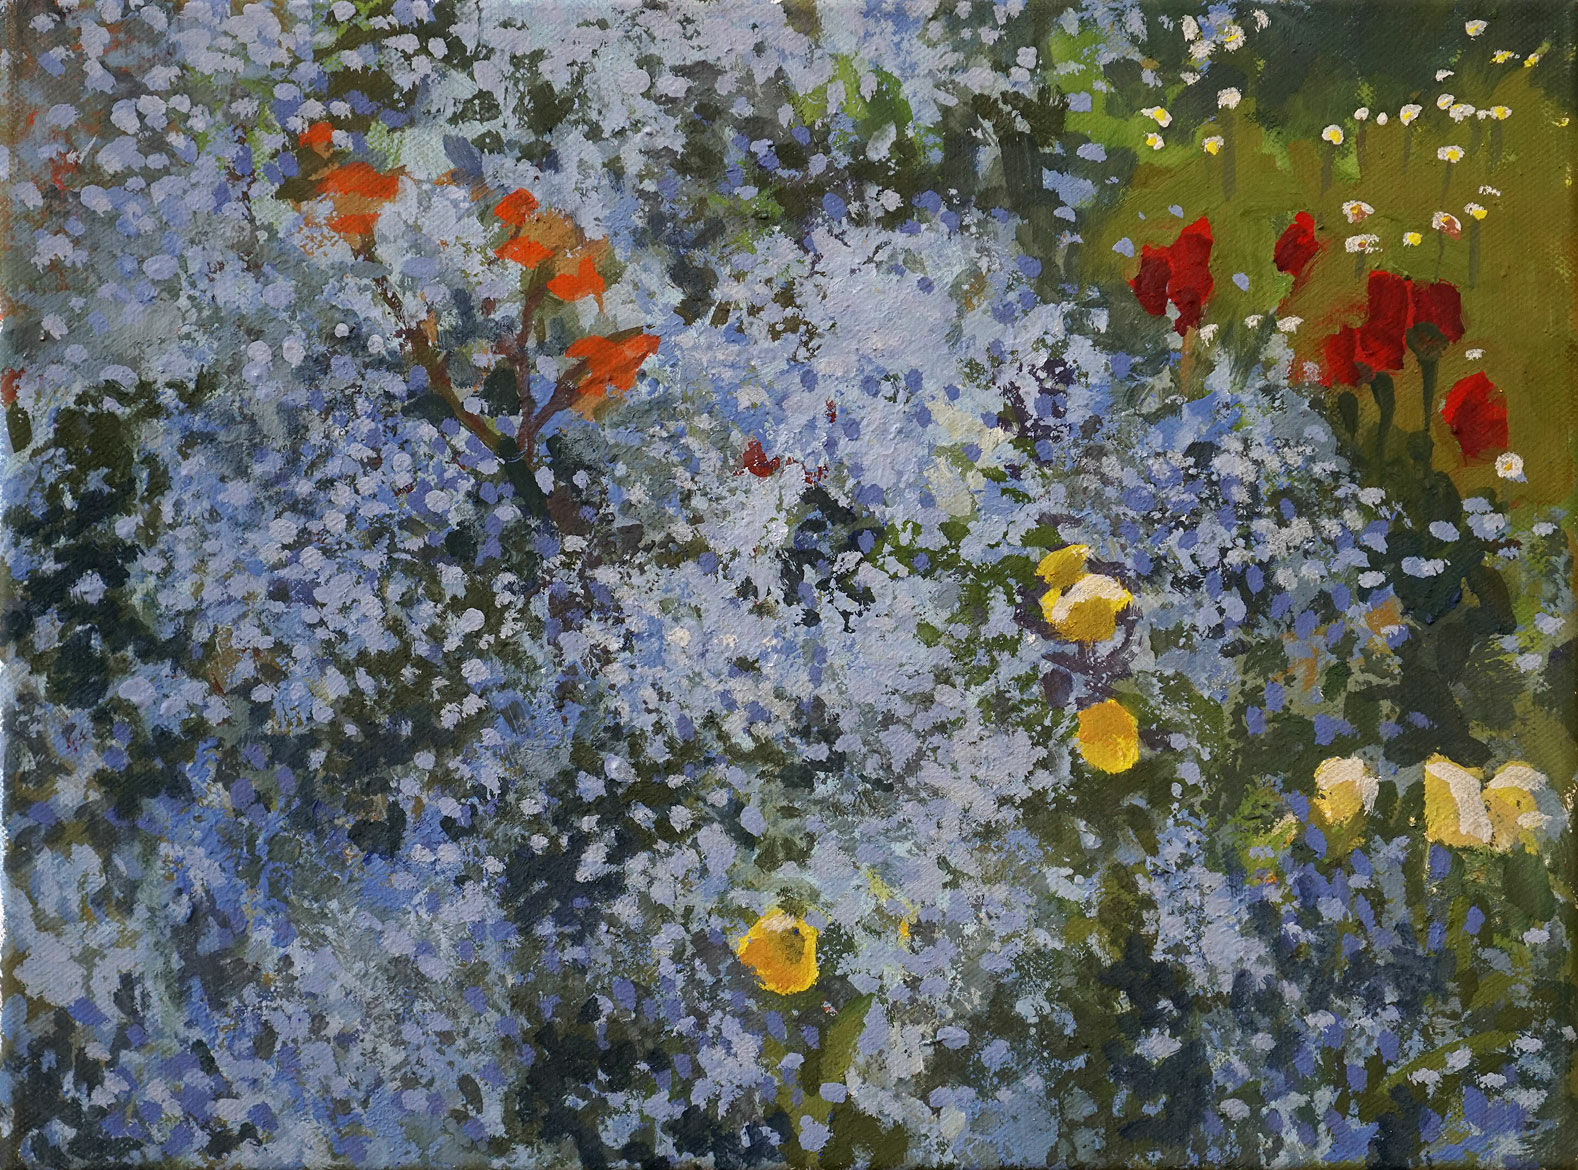 Picture " Forget-Me-Not and Poppy " (2020) (Original / Unique piece), on stretcher frame by Frank Suplie